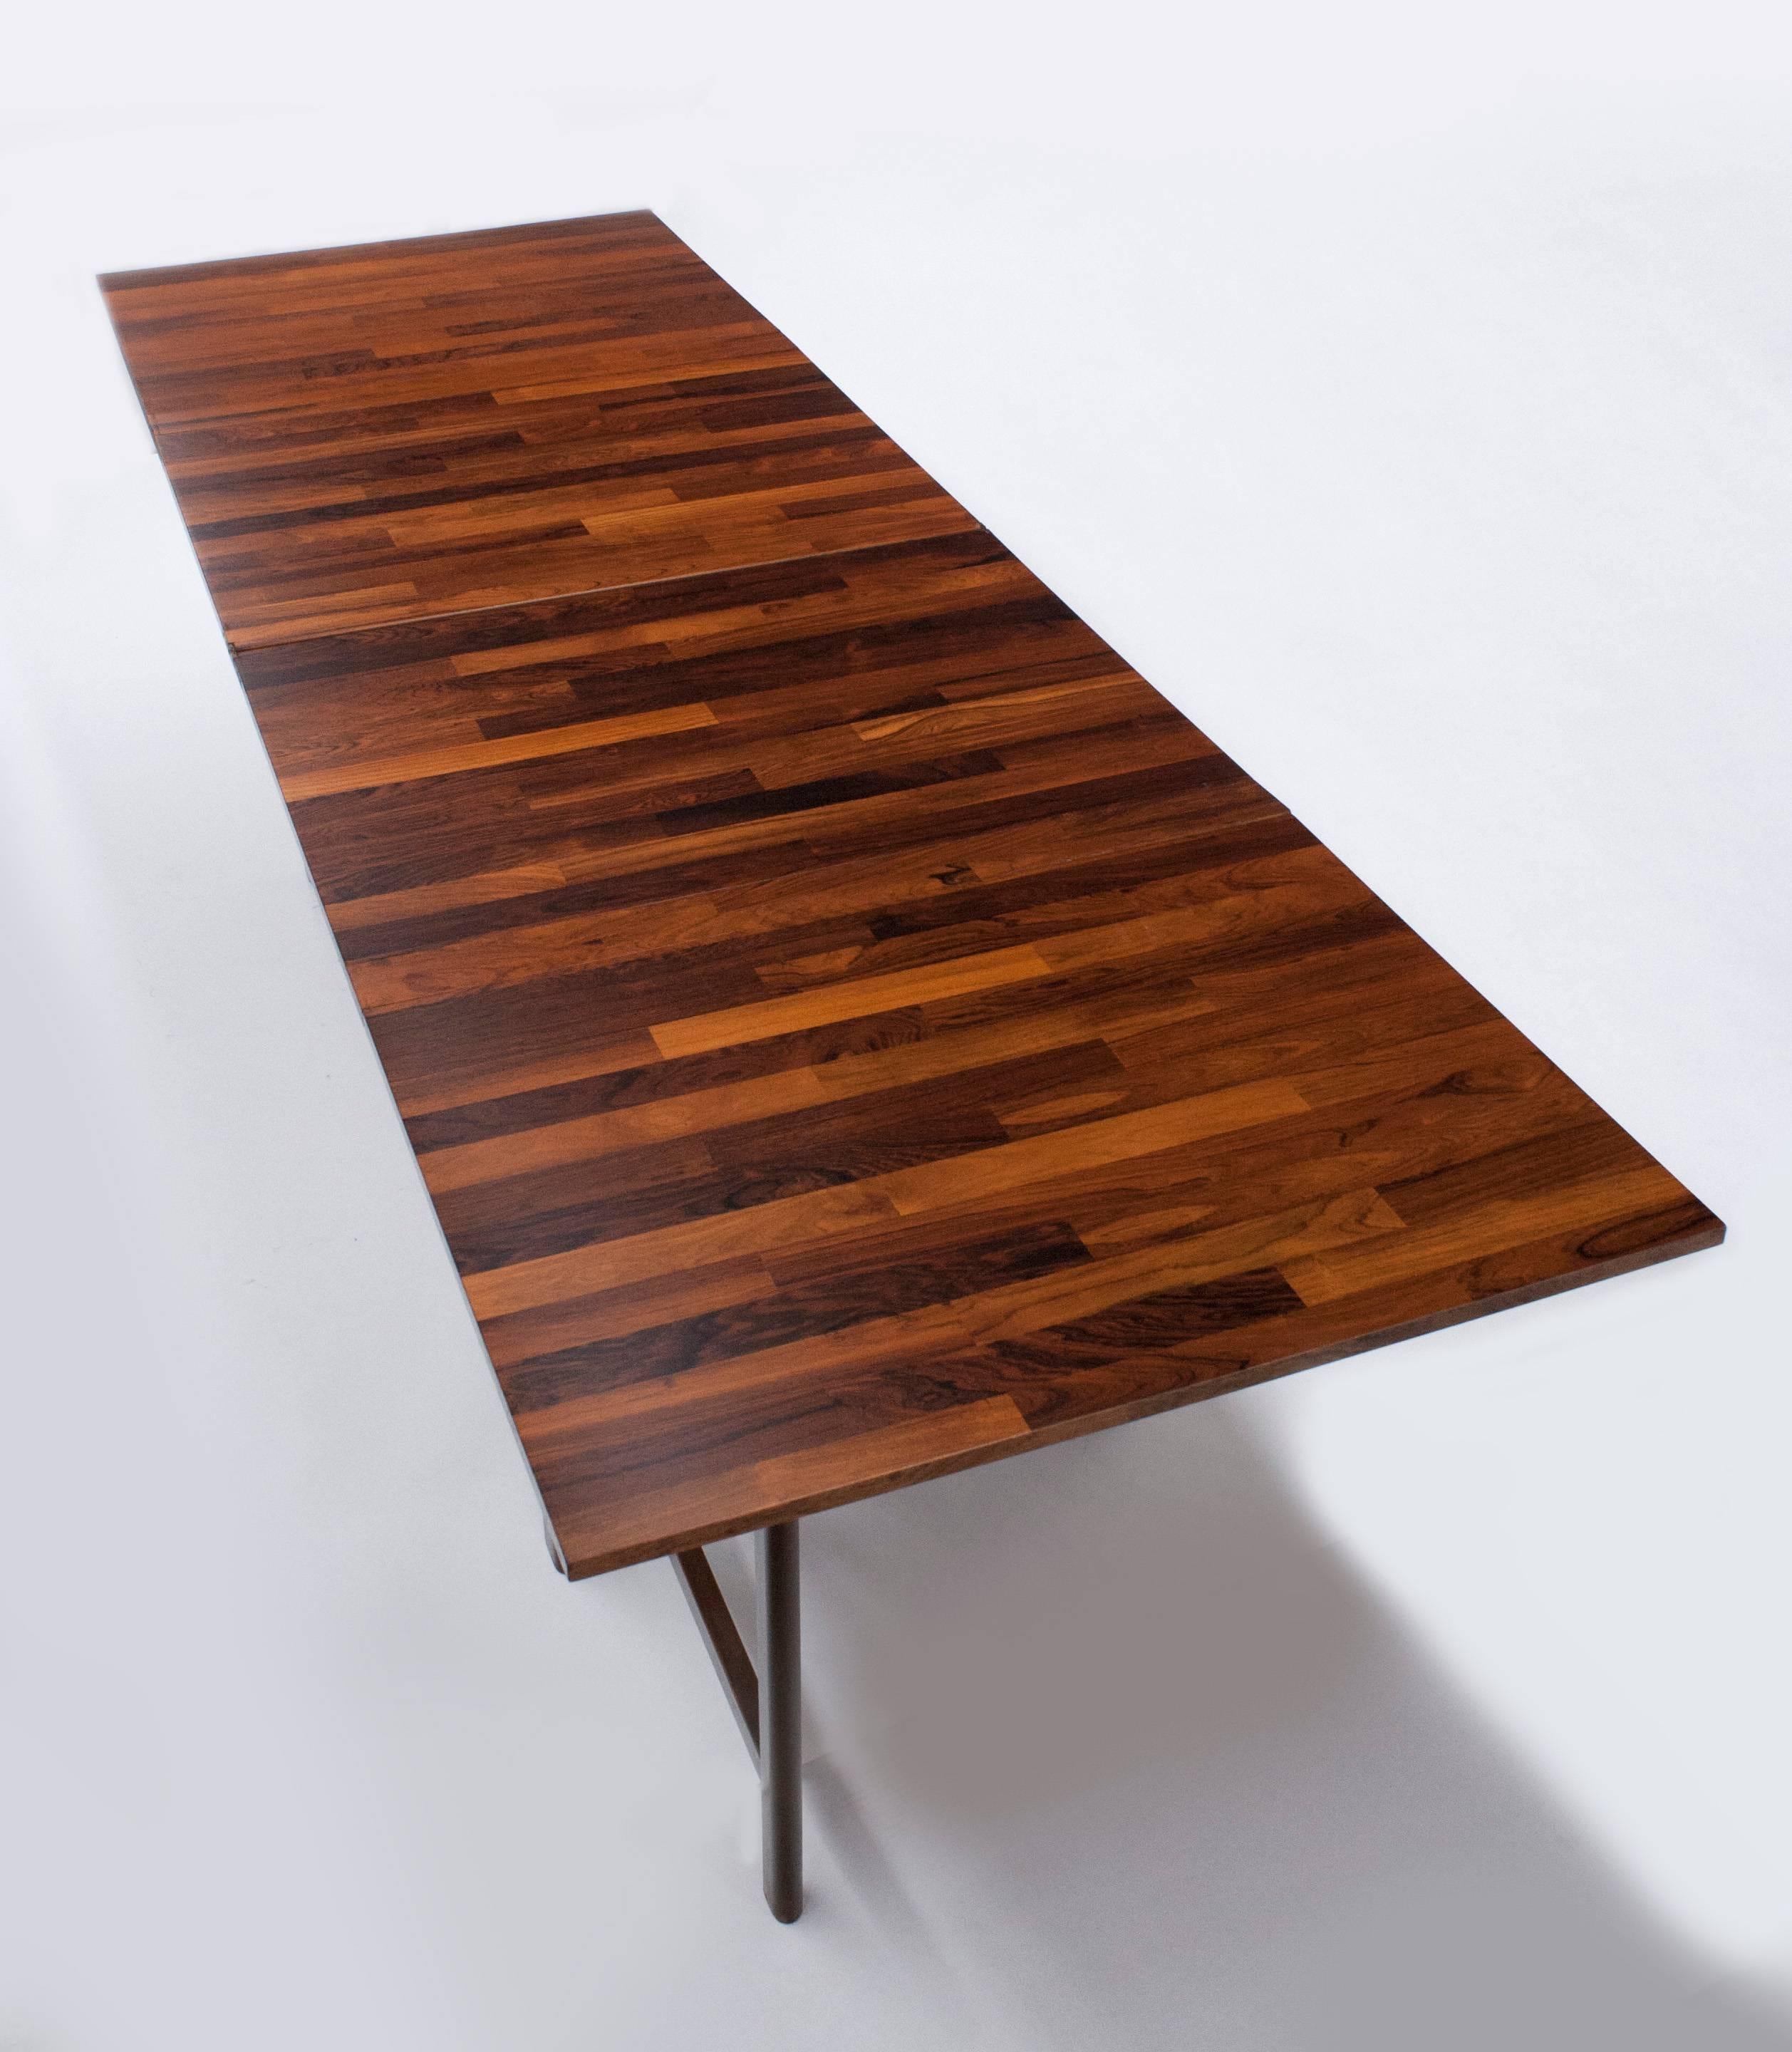 Exceptional butcher block pattern rosewood dining table by Bruno Mathsson.  Incredible design allows for table to be reduced to just 9.5 inches wide and then unfolded into various lengths. When completely extended table measures 28.5 H x 110 in W x